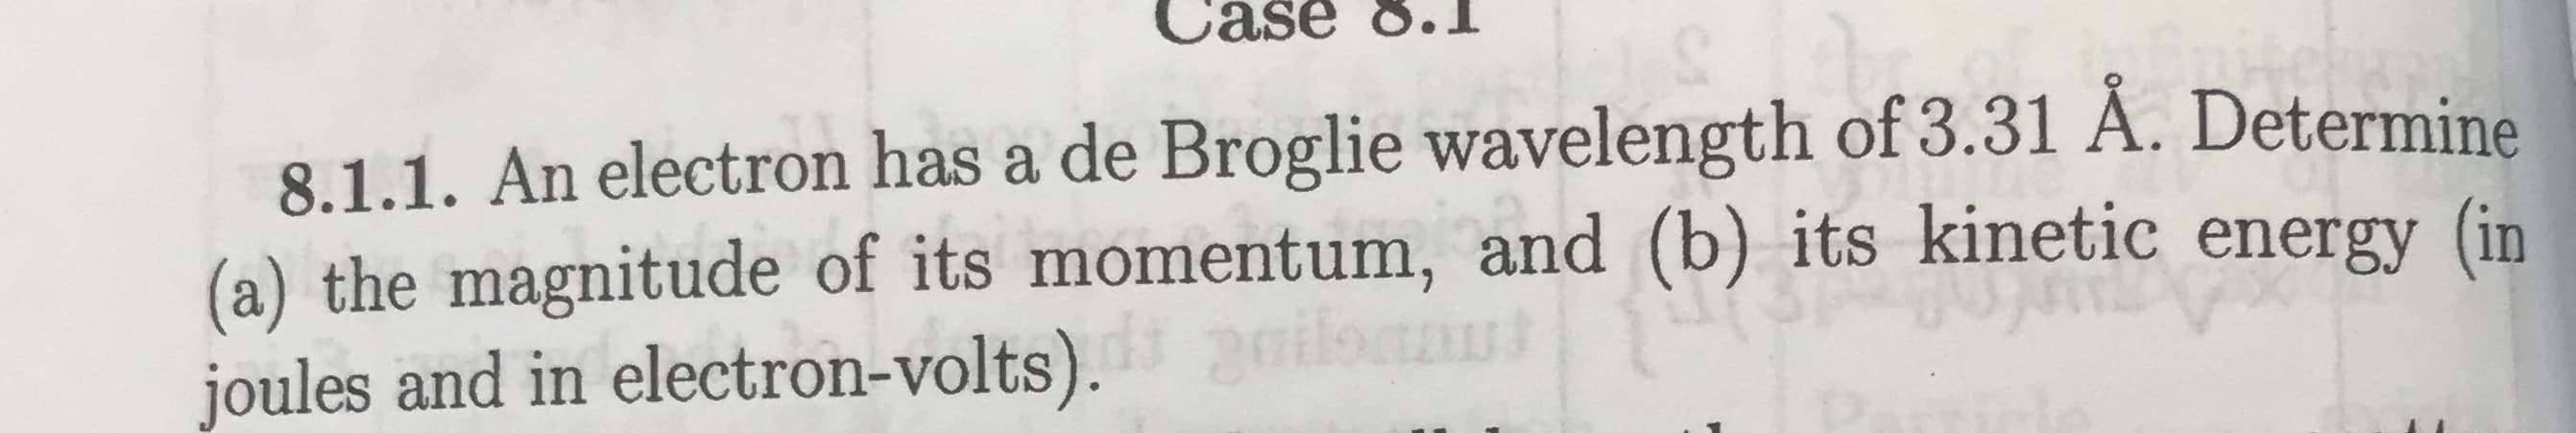 Case 8.T
8.1.1. An electron has a de Broglie wavelength of 3.31 A. Determine
(a) the magnitude of its momentum, and (b) its kinetic energy (in
joules and in electron-volts).2oiloanut
